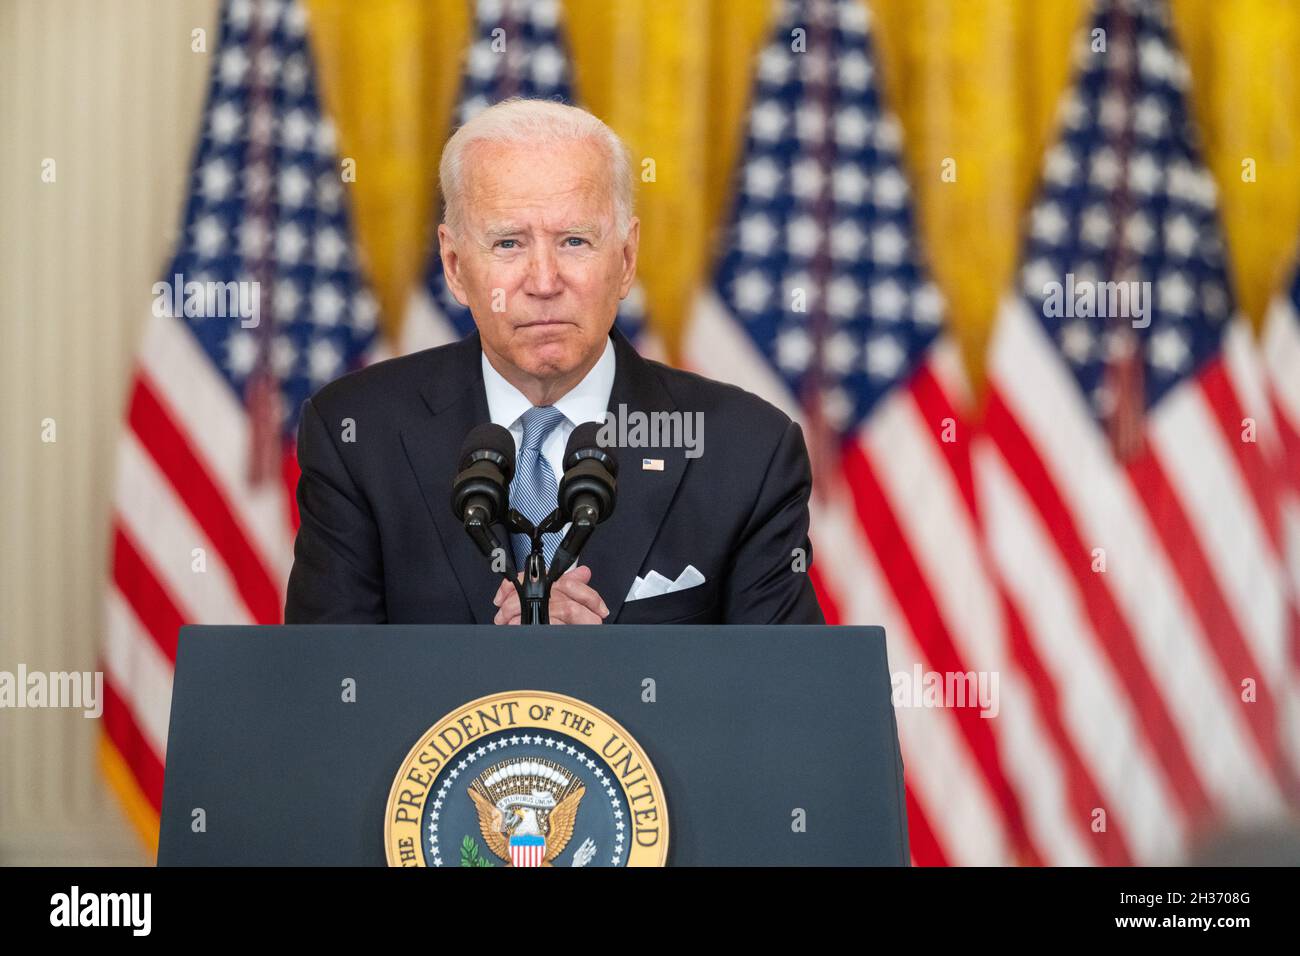 WASHINGTON DC, USA - 16 August 2021 - US President Joe Biden delivers remarks on the situation in Afghanistan, after the widrawl of US and other NATO Stock Photo